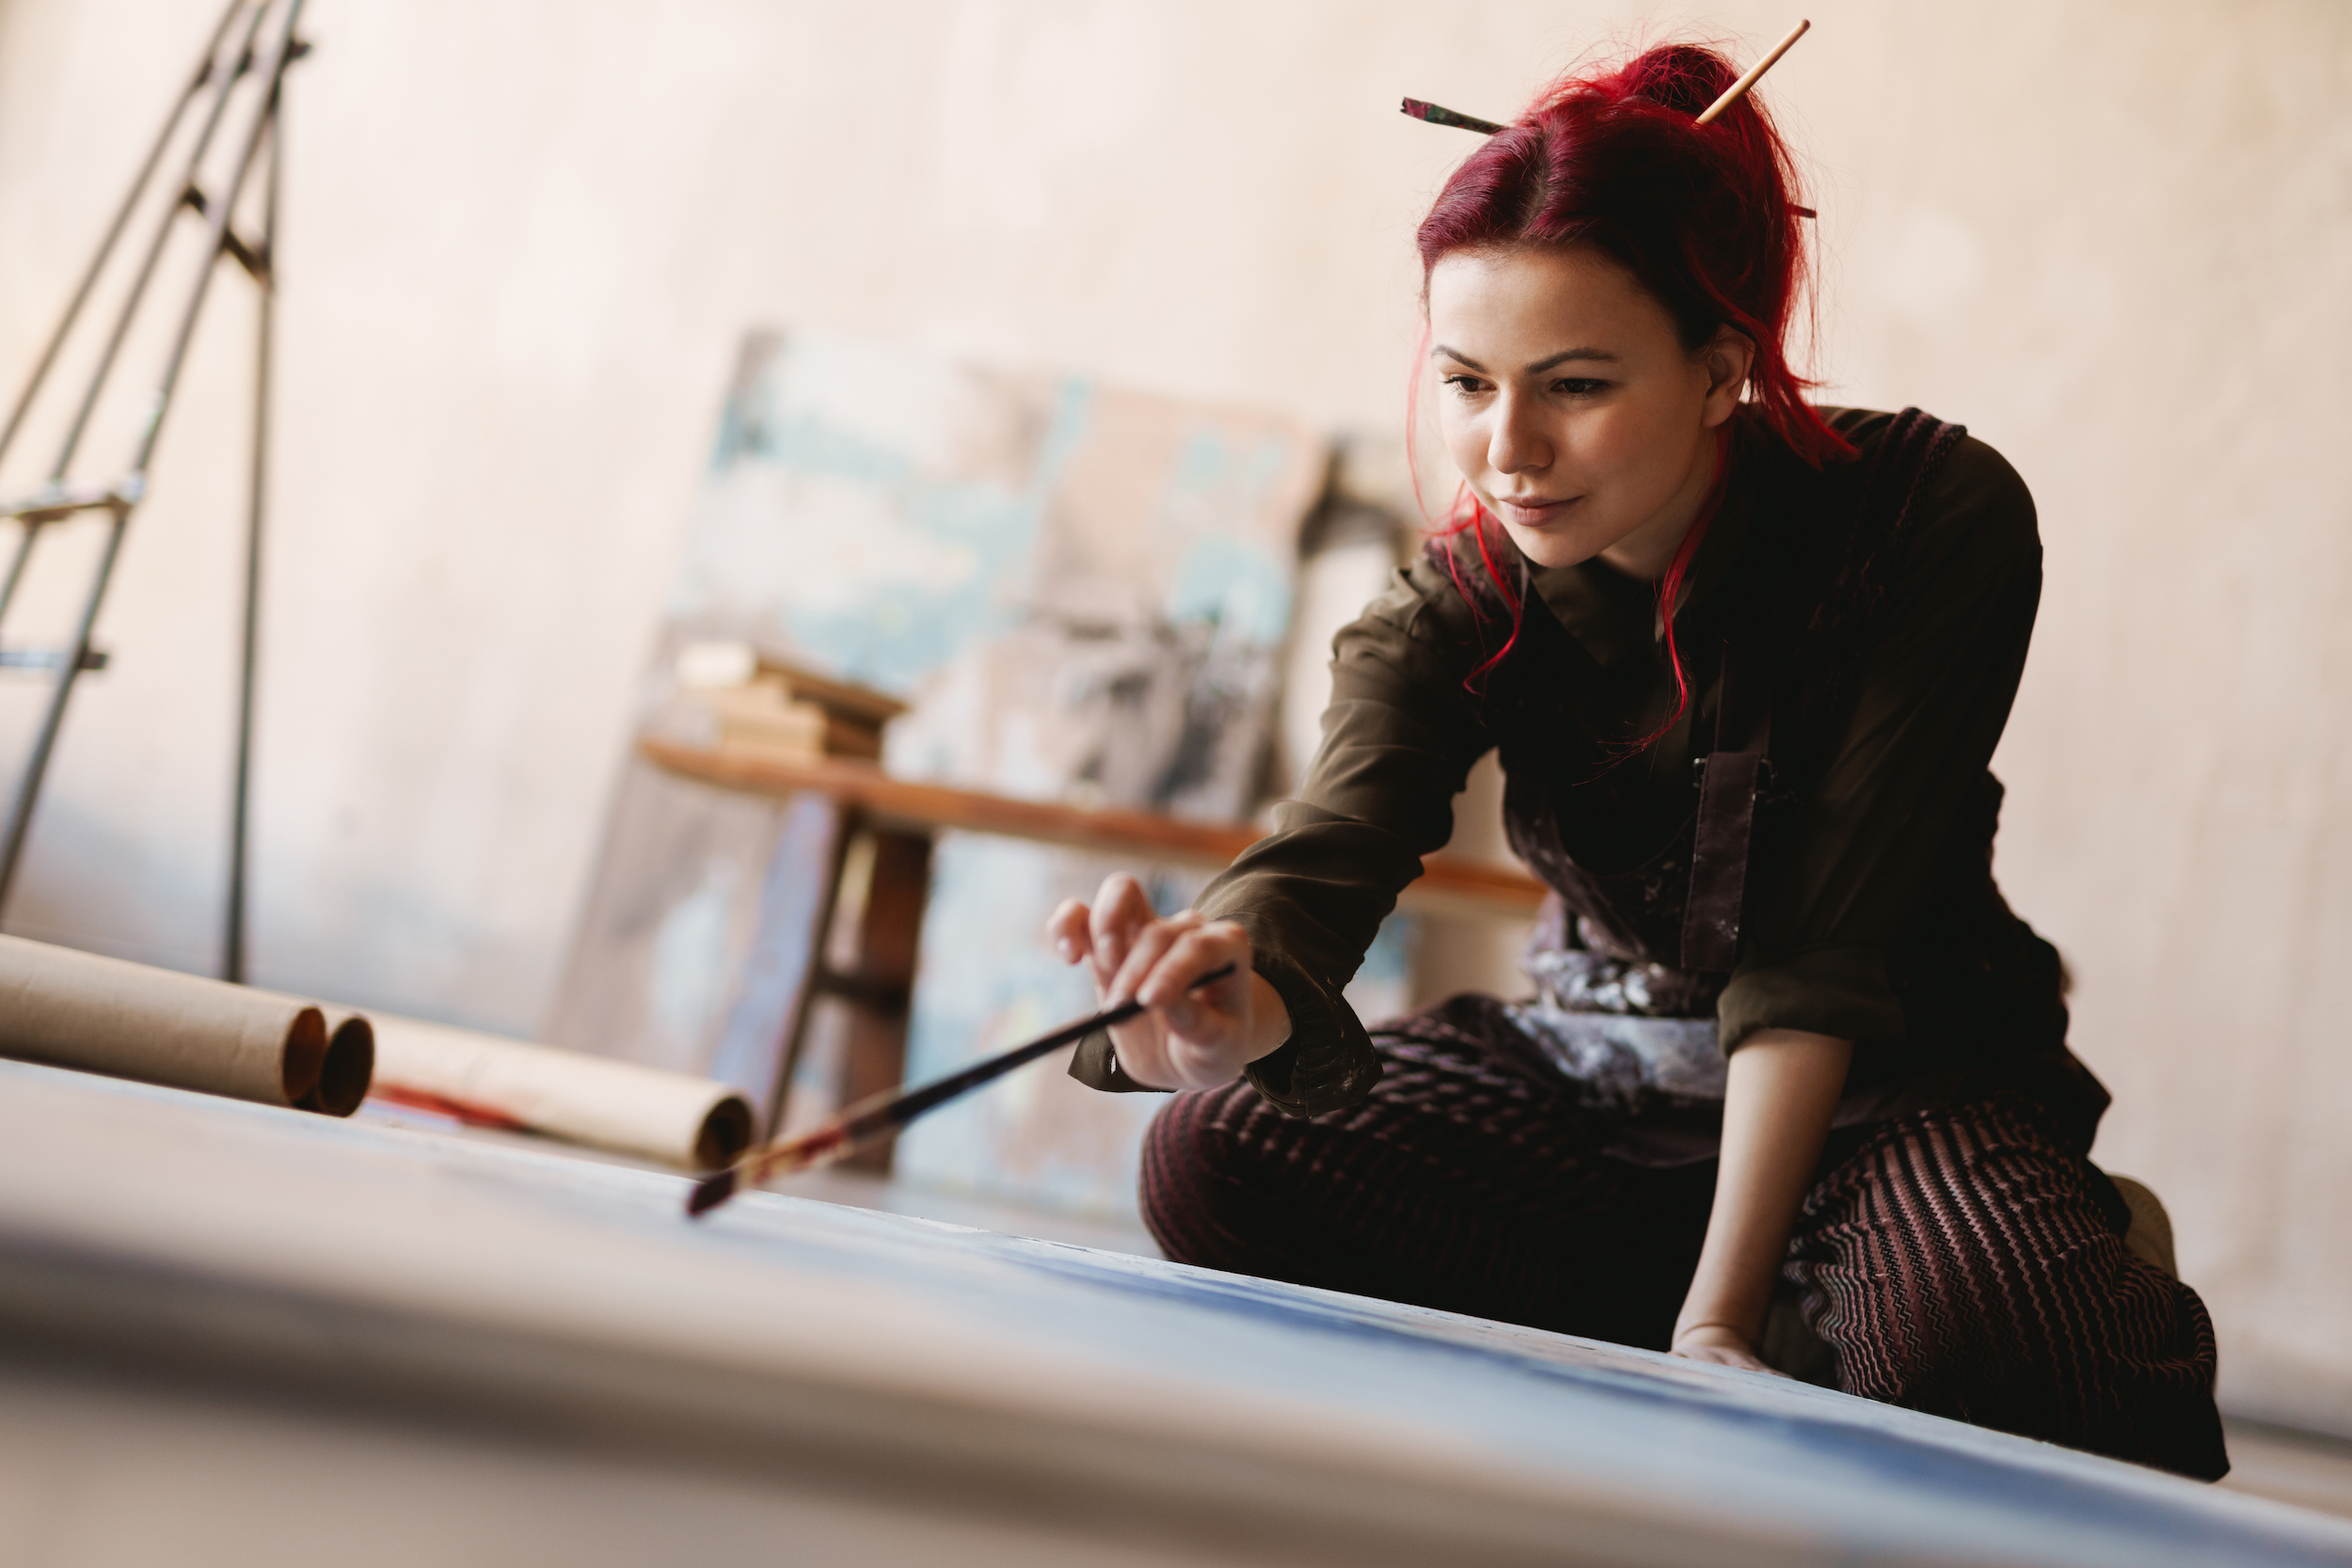 Young woman painting in an art studio